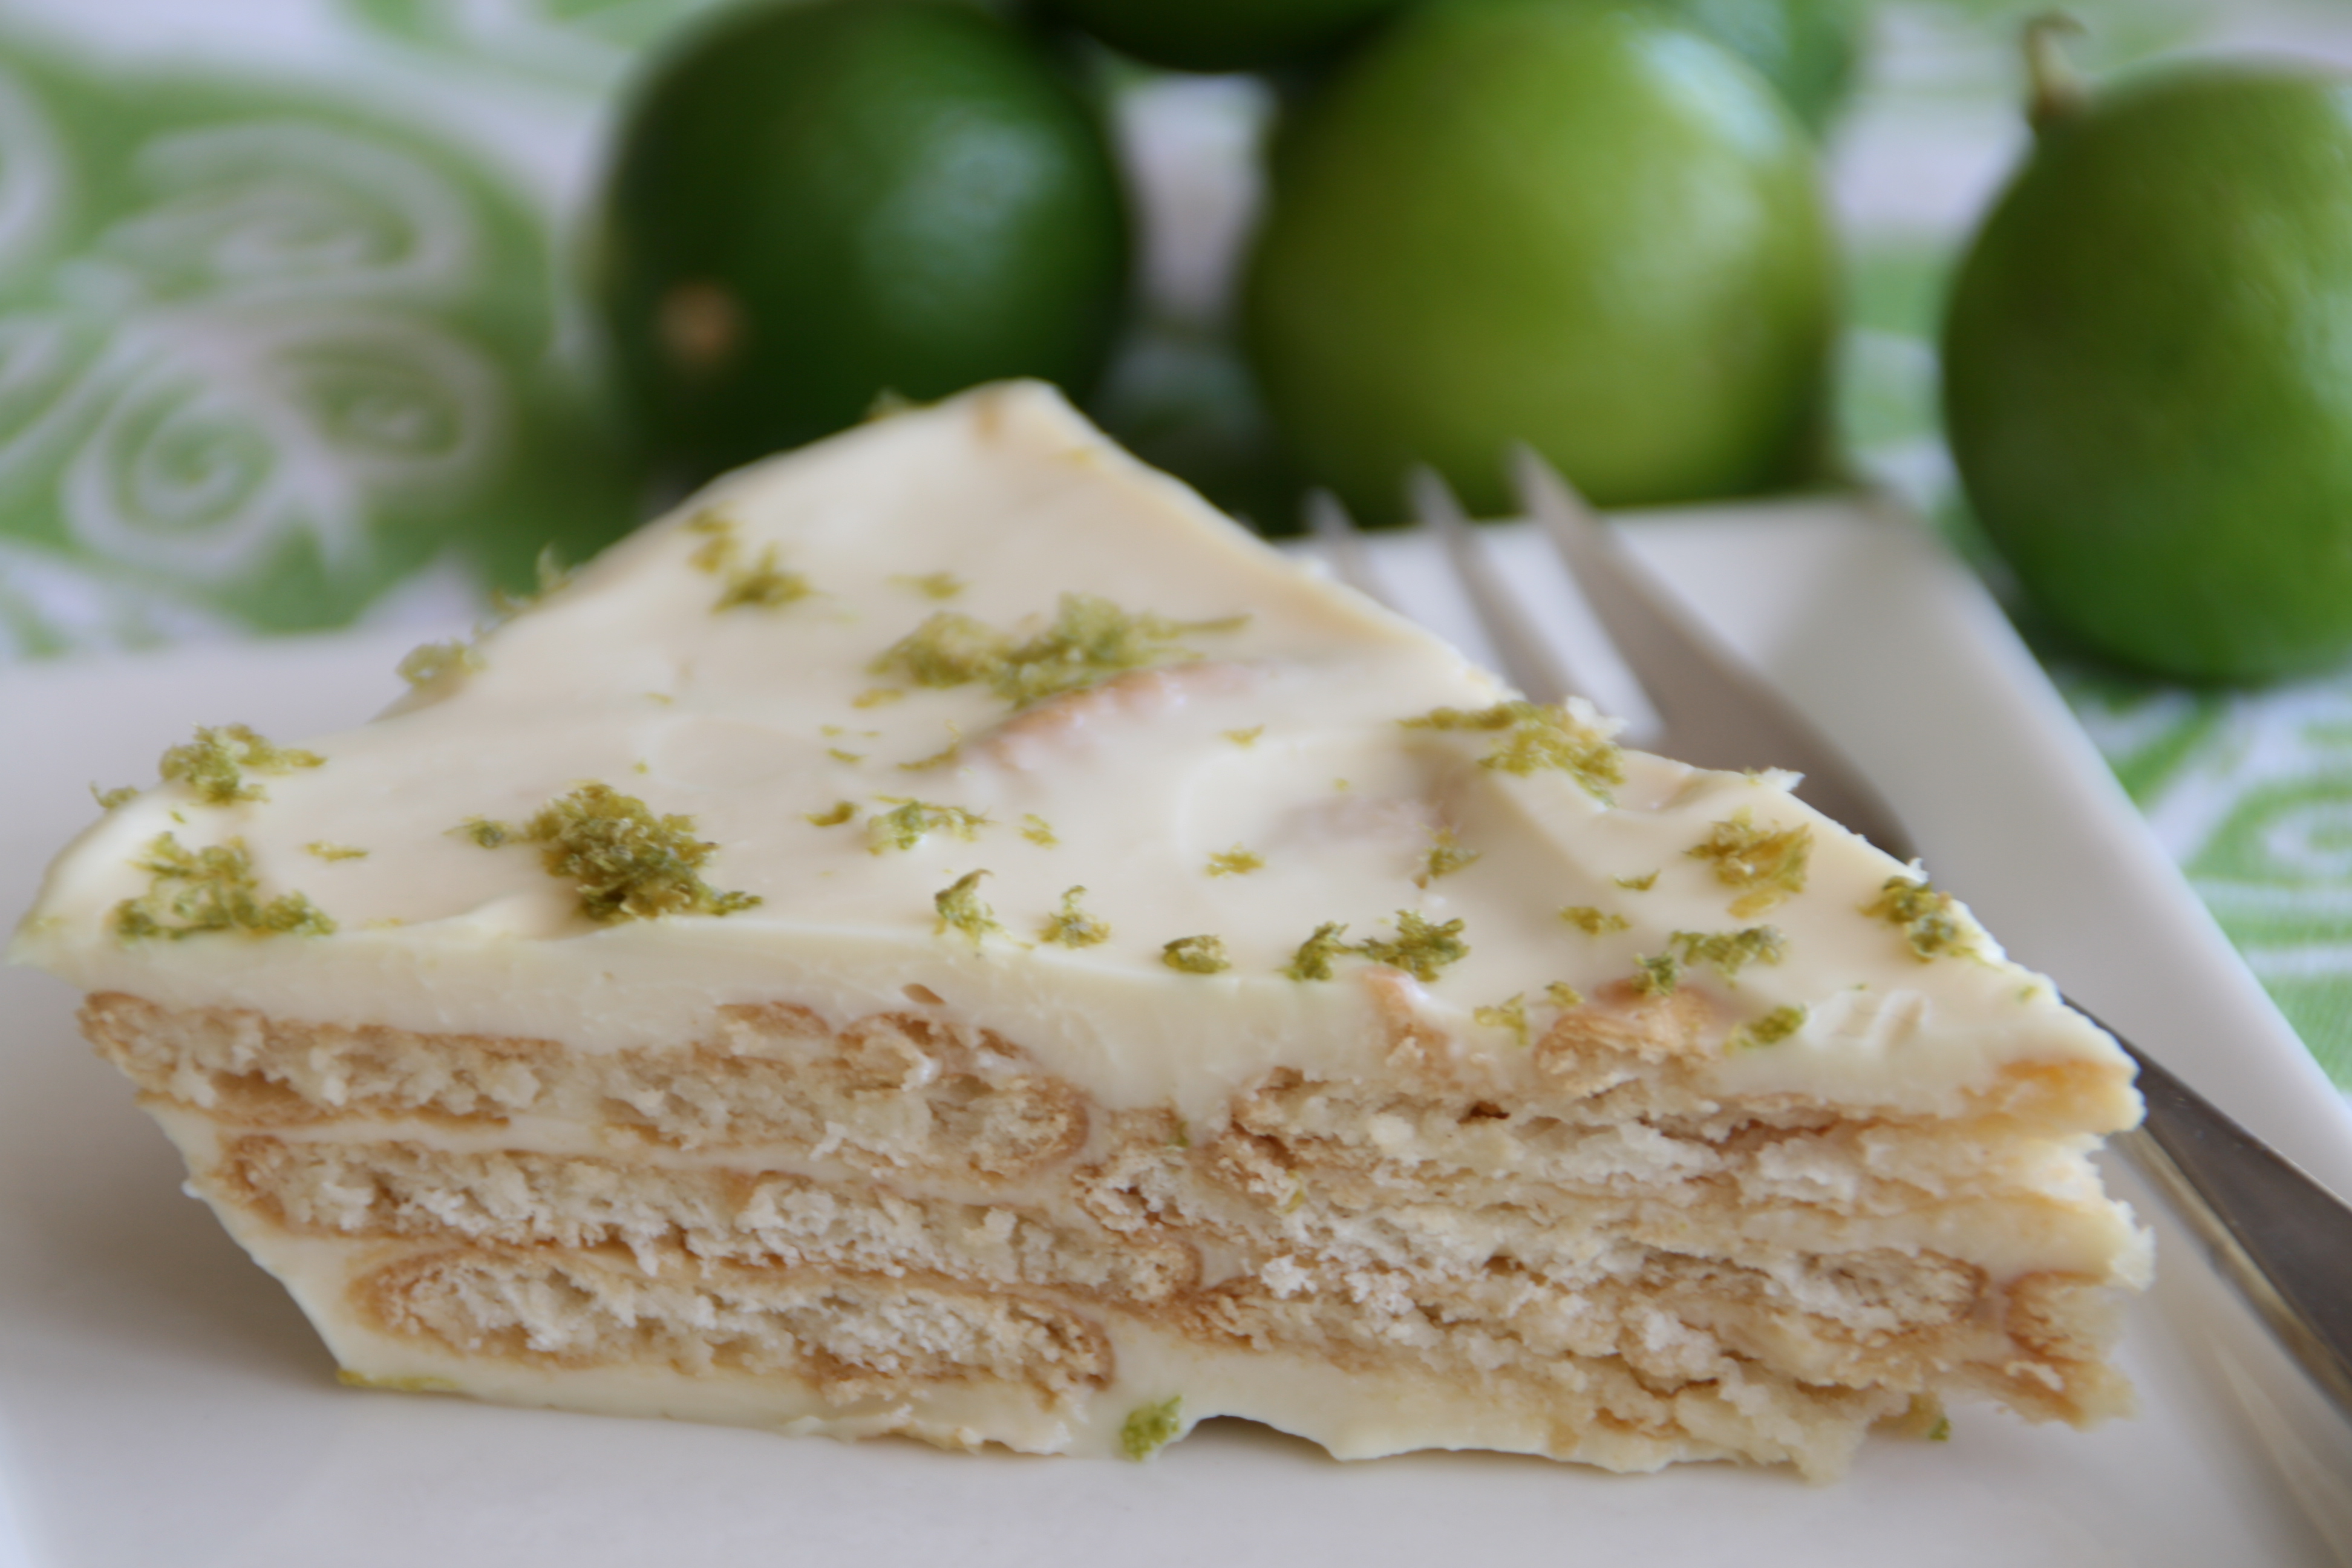 Slice of Key Lime Cracker Pie with green limes in the background